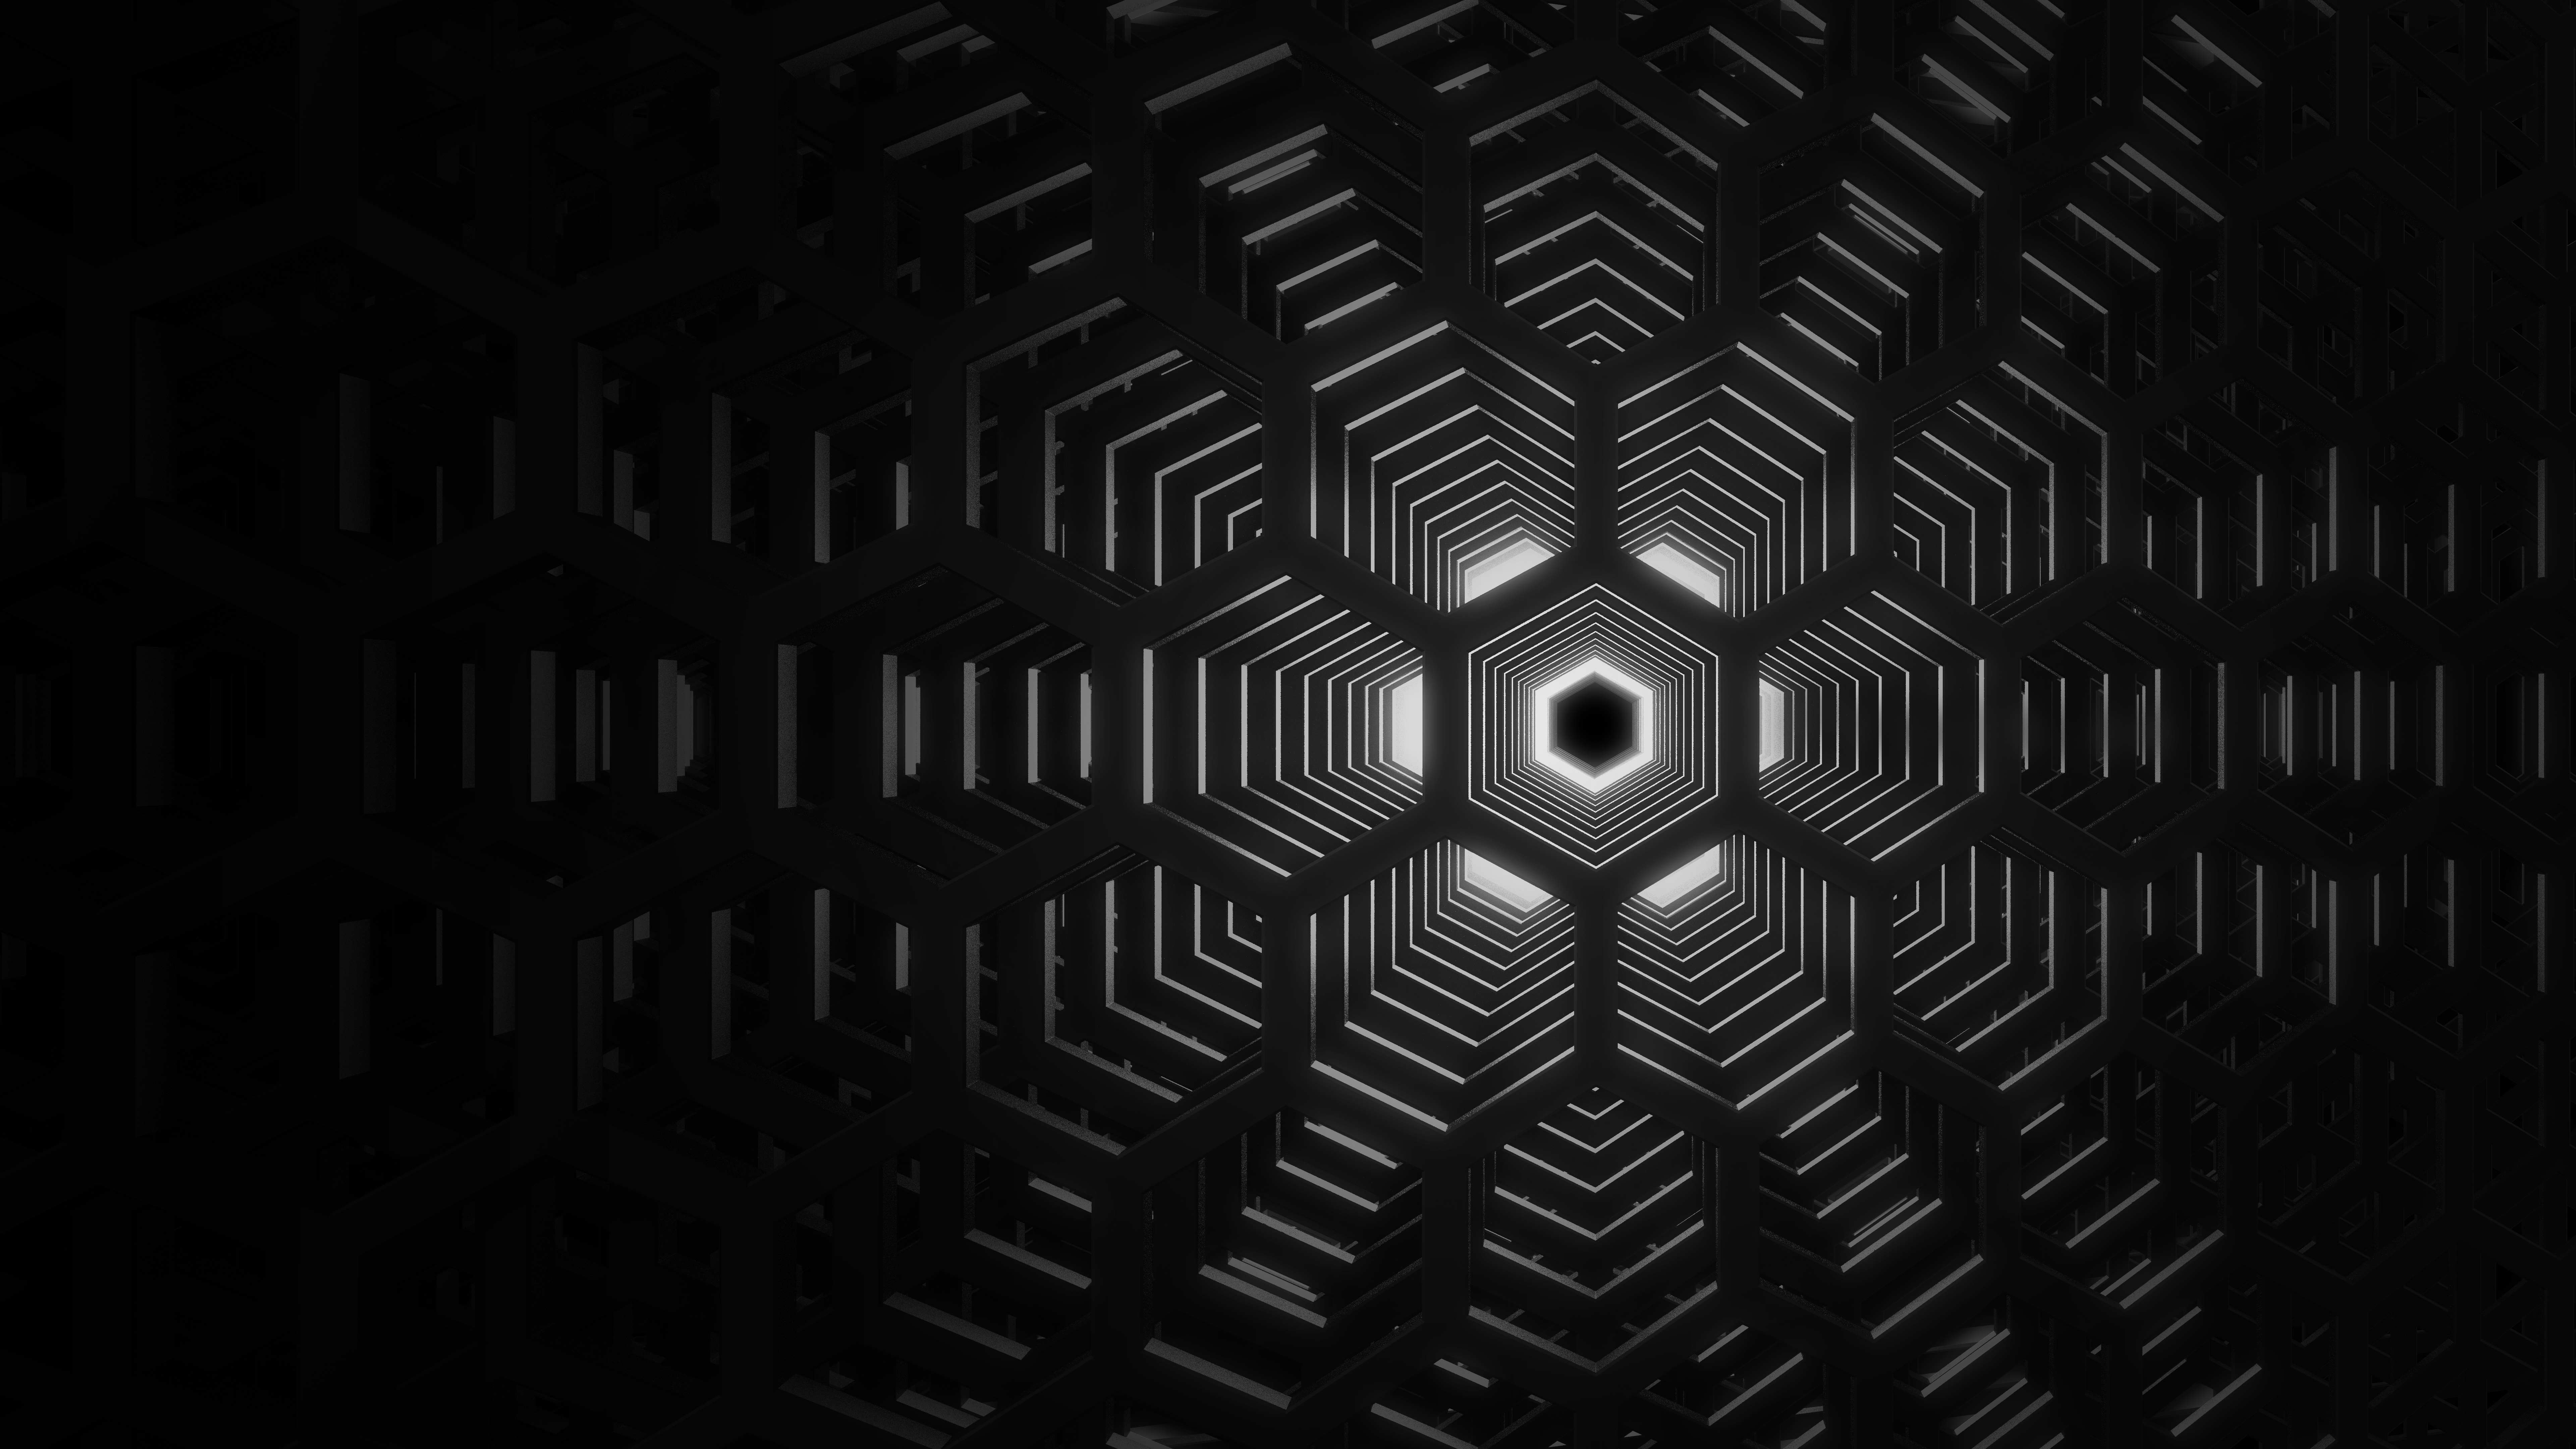 General 7680x4320 Dell abstract 3D Abstract pentagons dark background shapes monochrome pattern simple background CGI